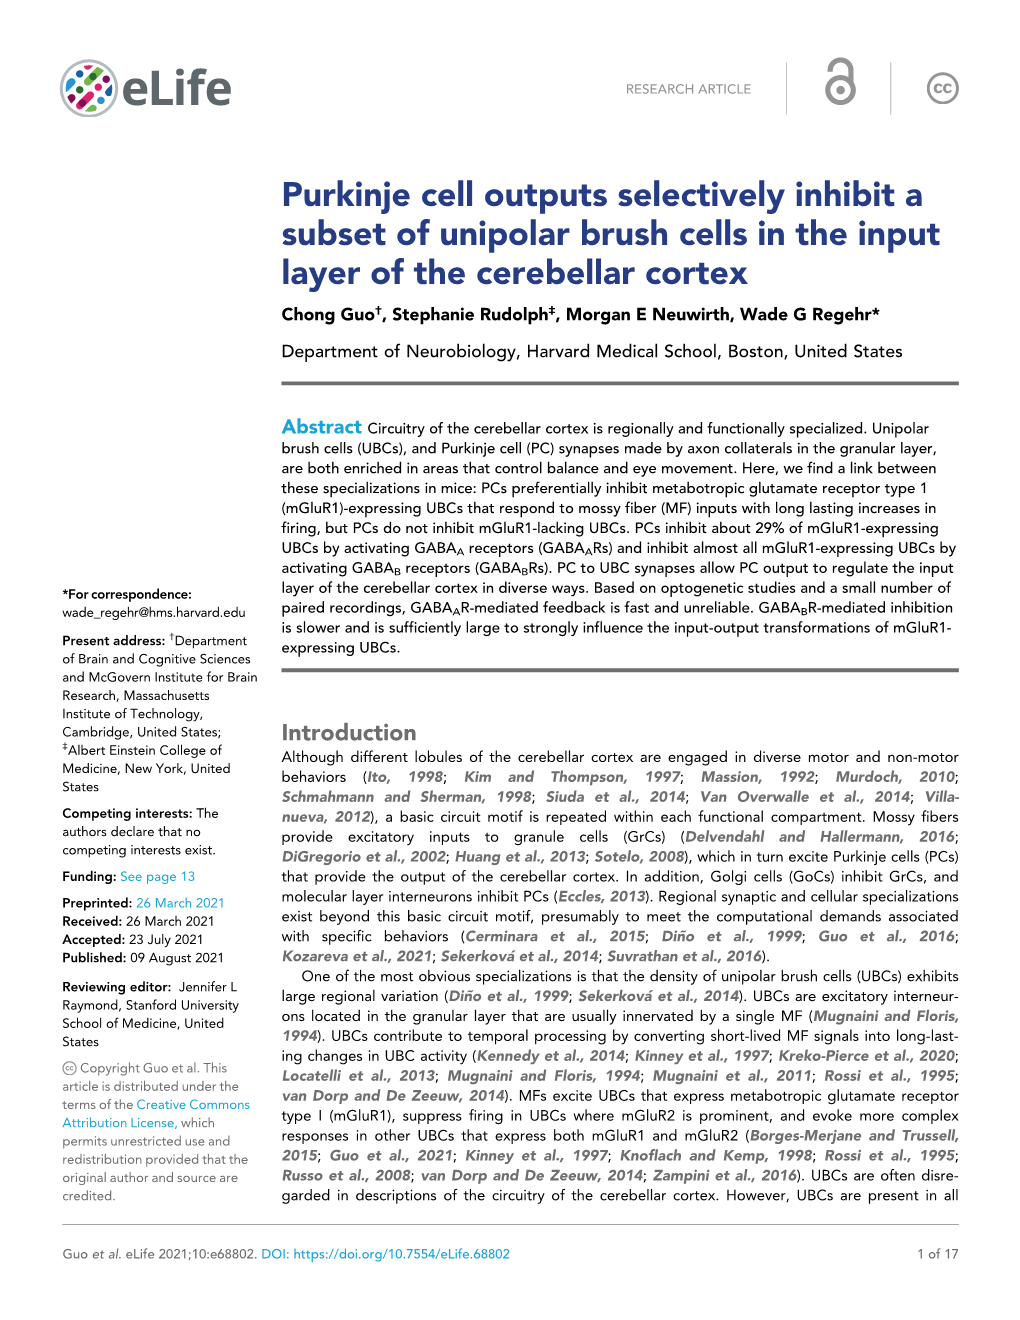 Purkinje Cell Outputs Selectively Inhibit a Subset of Unipolar Brush Cells In